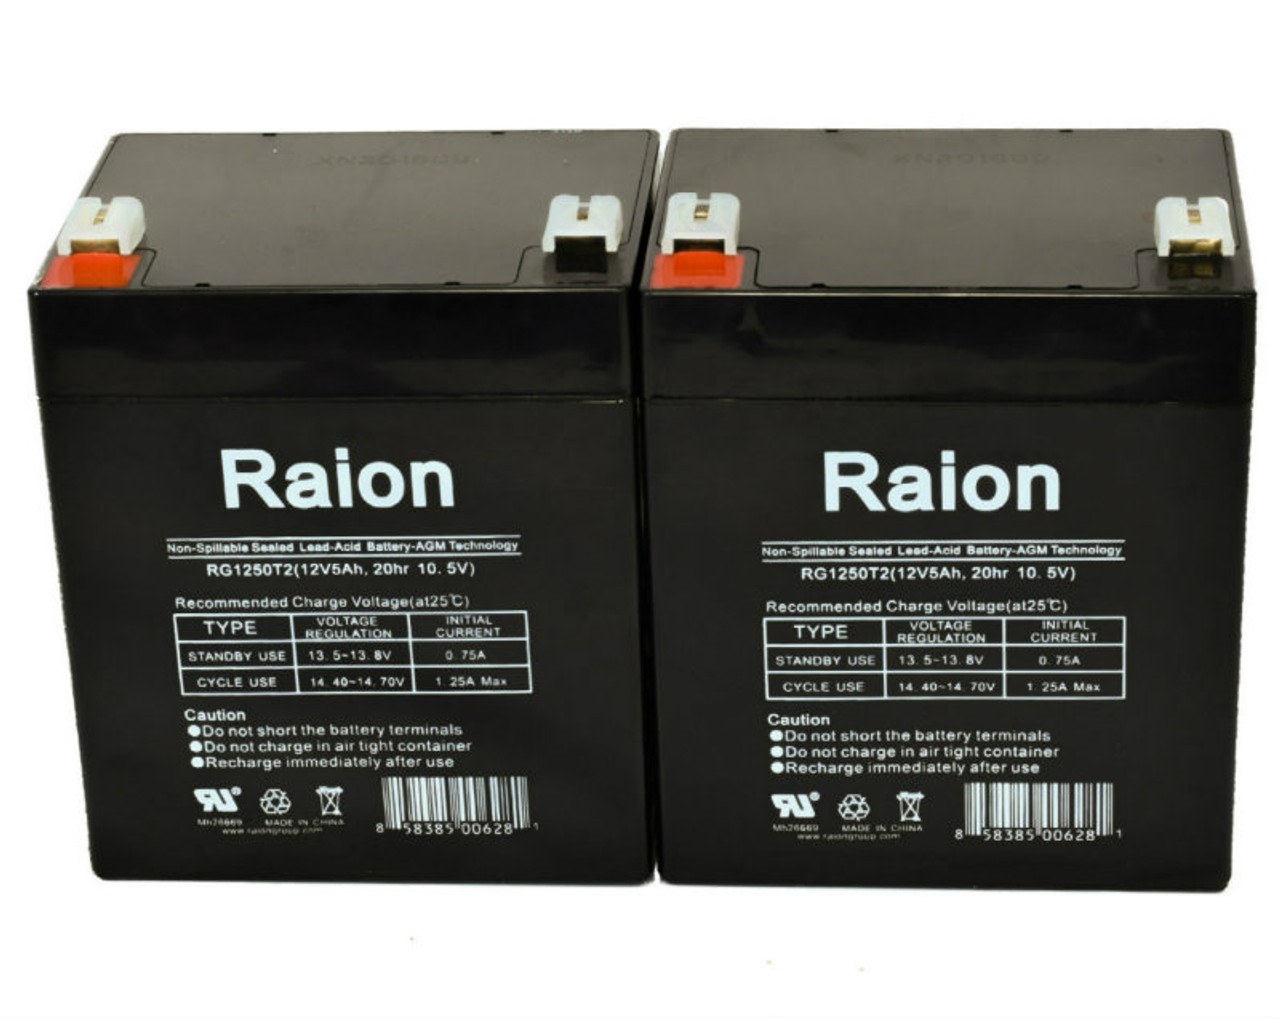 Raion Power 12V 5Ah RG1250T2 Replacement Lead Acid Battery for Tysonic TY12-5 - 2 Pack